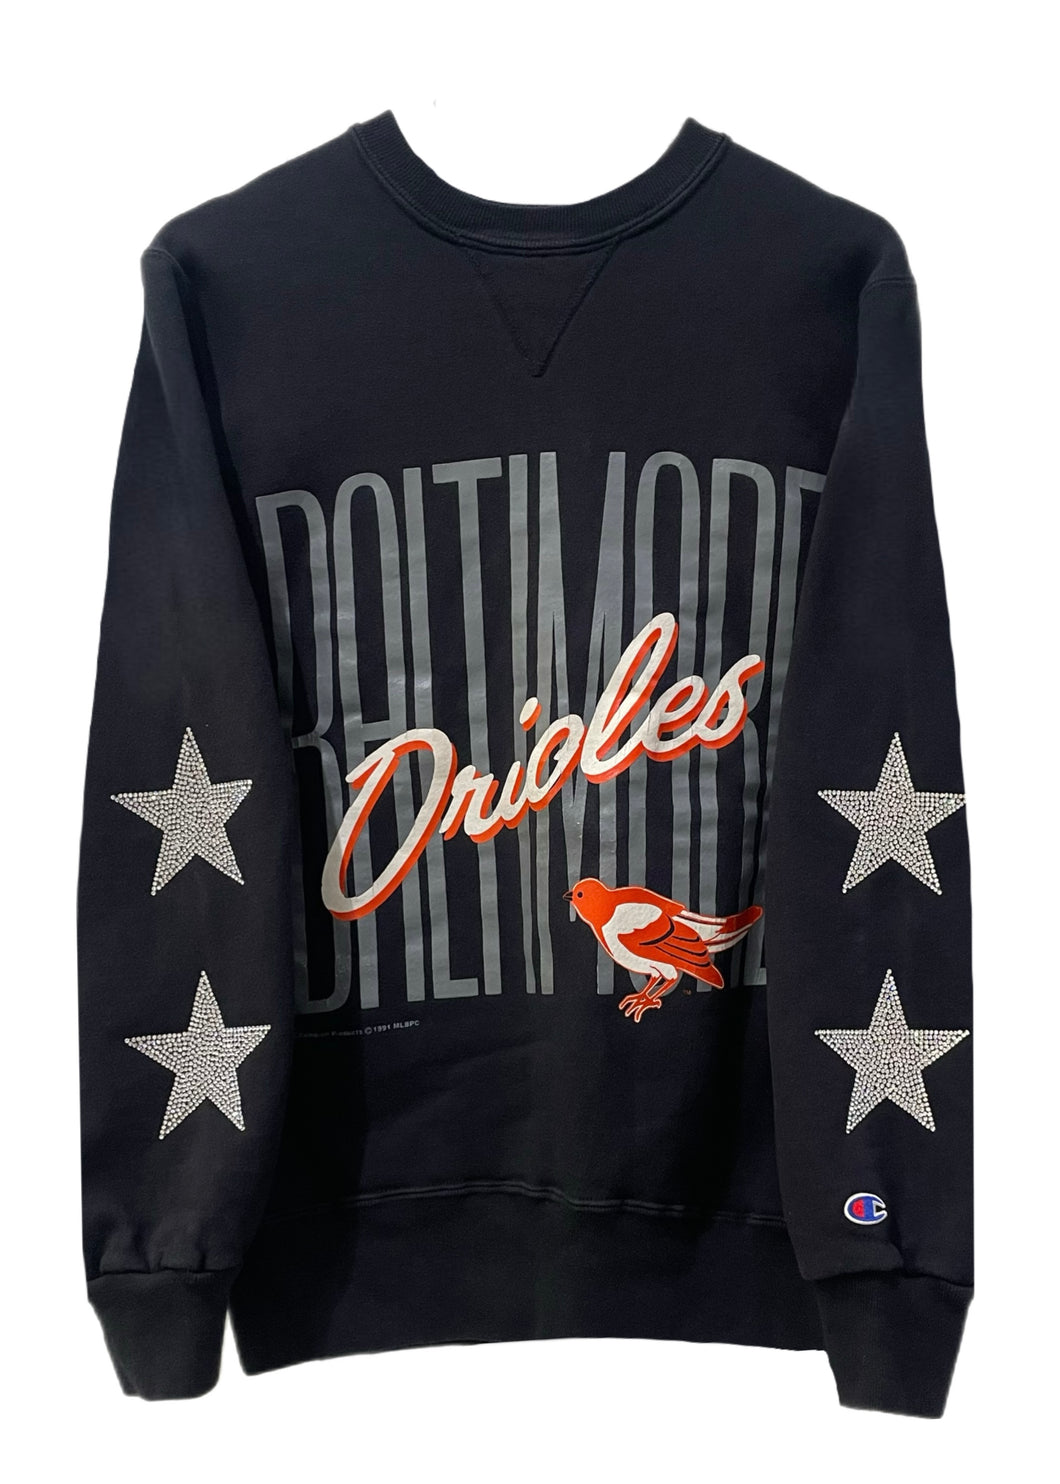 Baltimore Orioles, MLB One of a KIND Vintage Sweatshirt with Crystal Star Design